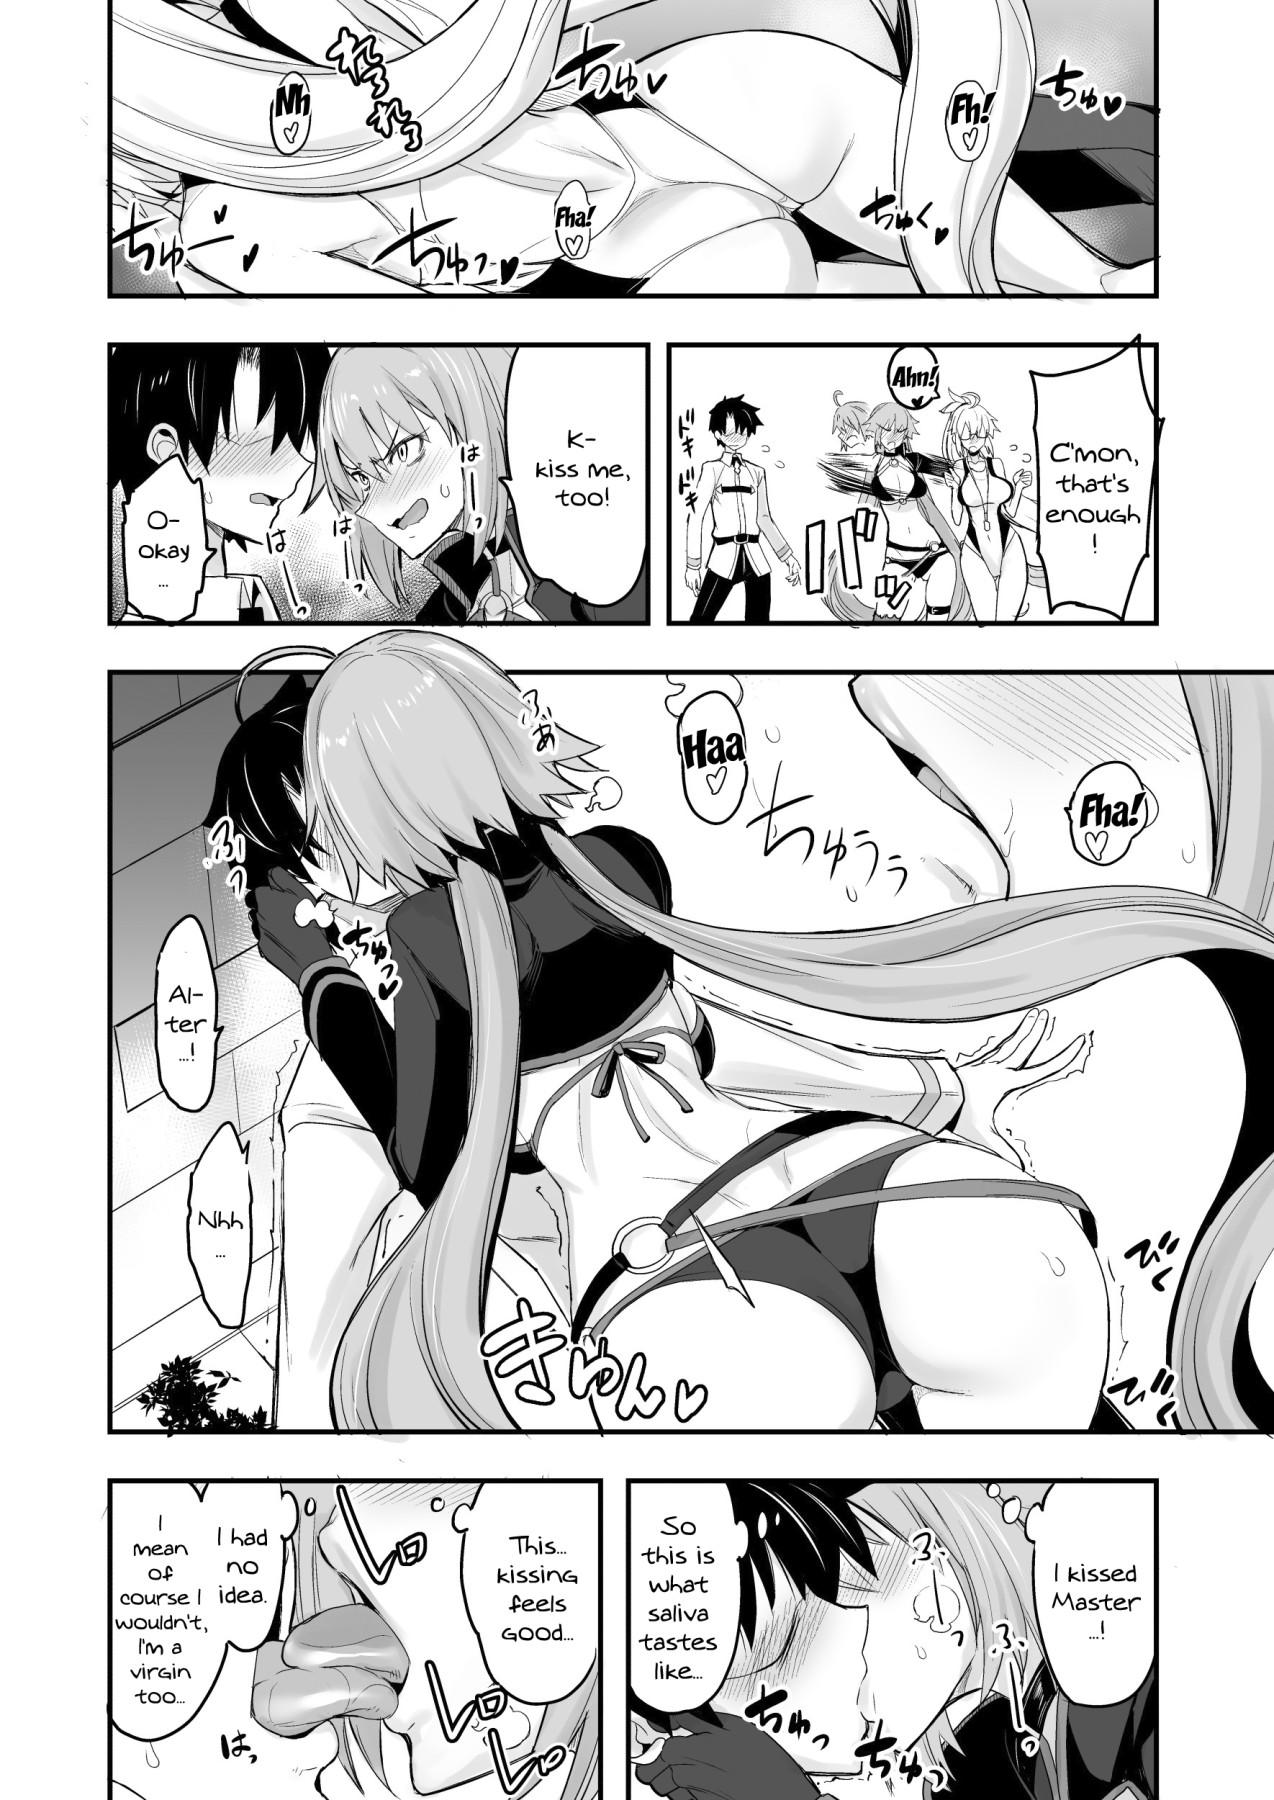 Calcinha w jeanne vs master - Fate grand order Asses - Page 5